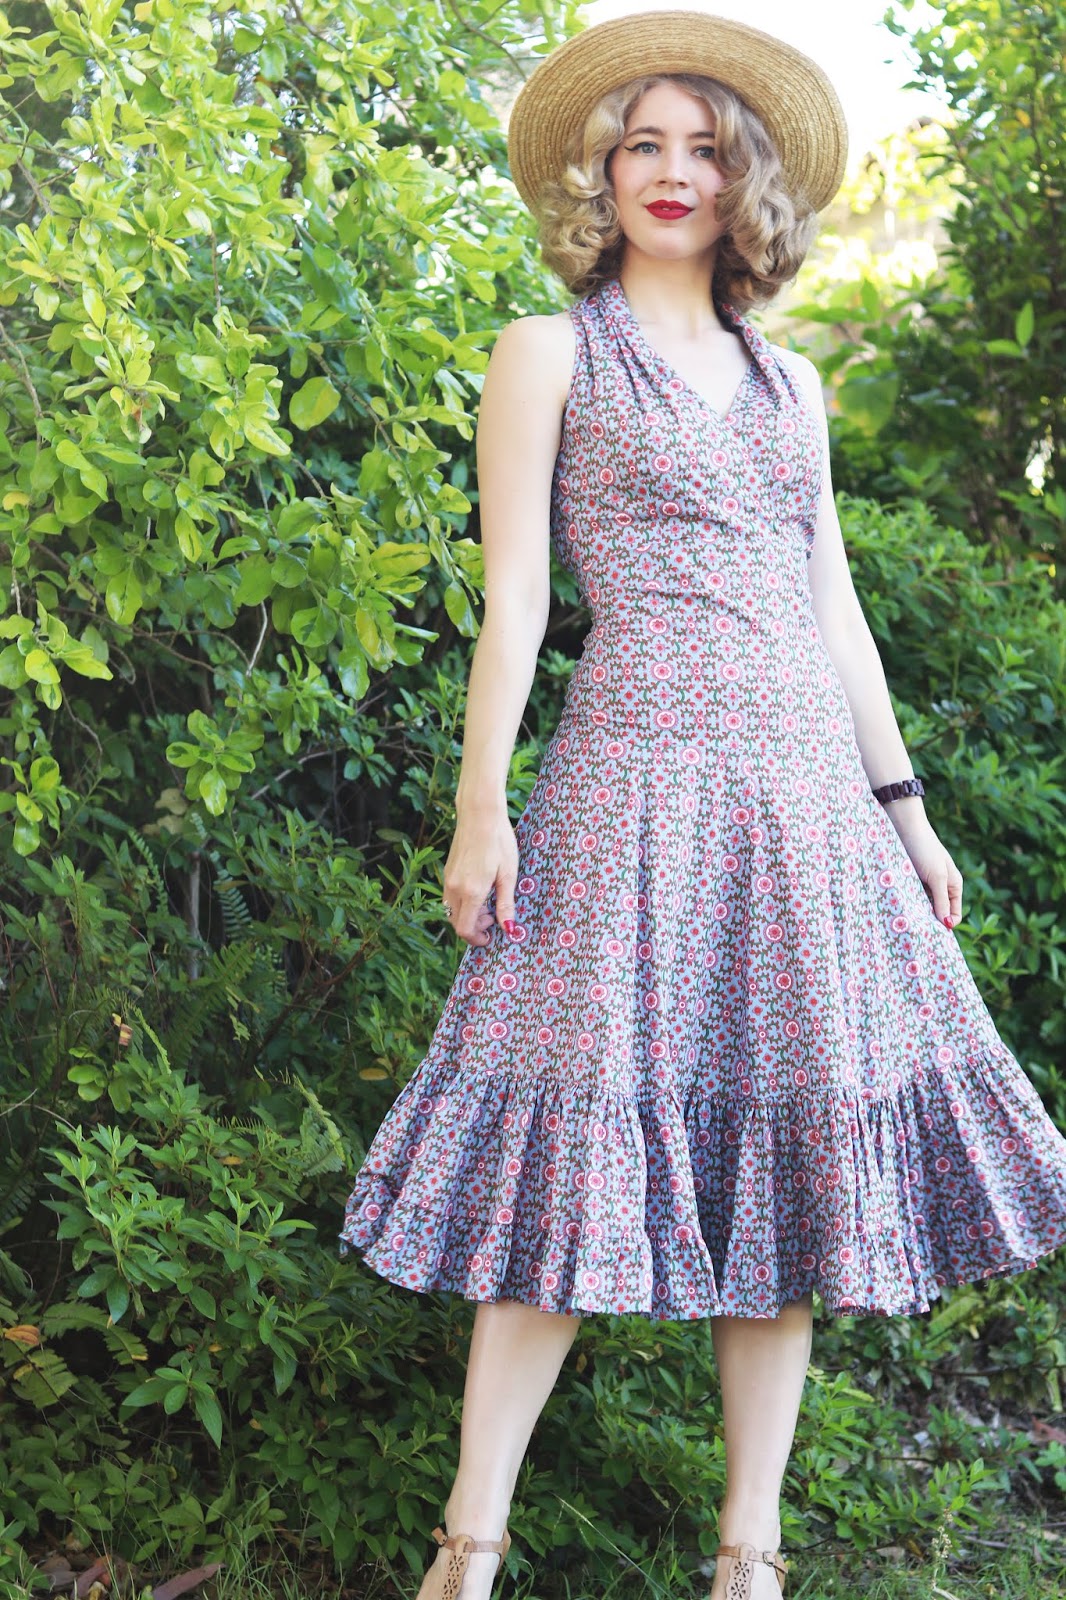 Summer Days in the Polly Dress | GracefullyVintage